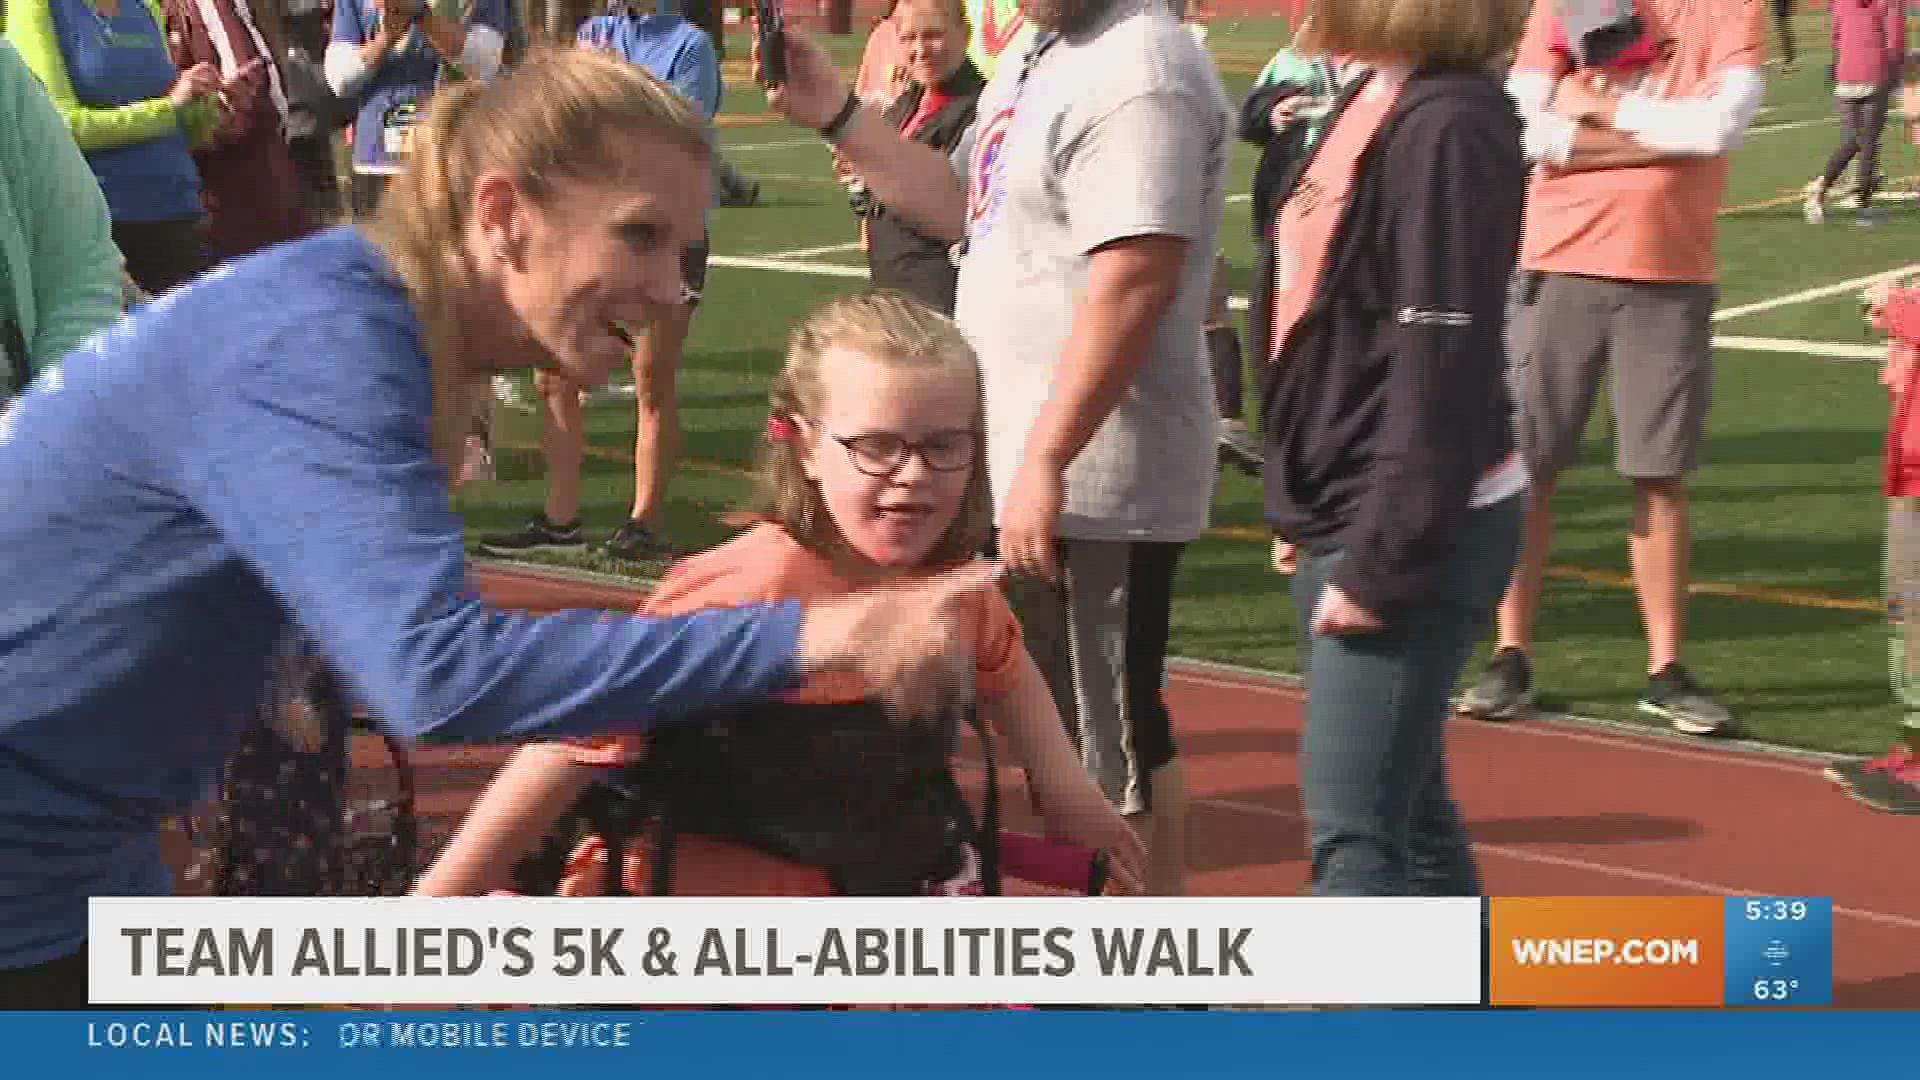 Team Allied Service's 5K & All Abilities Walk is taking place this weekend.